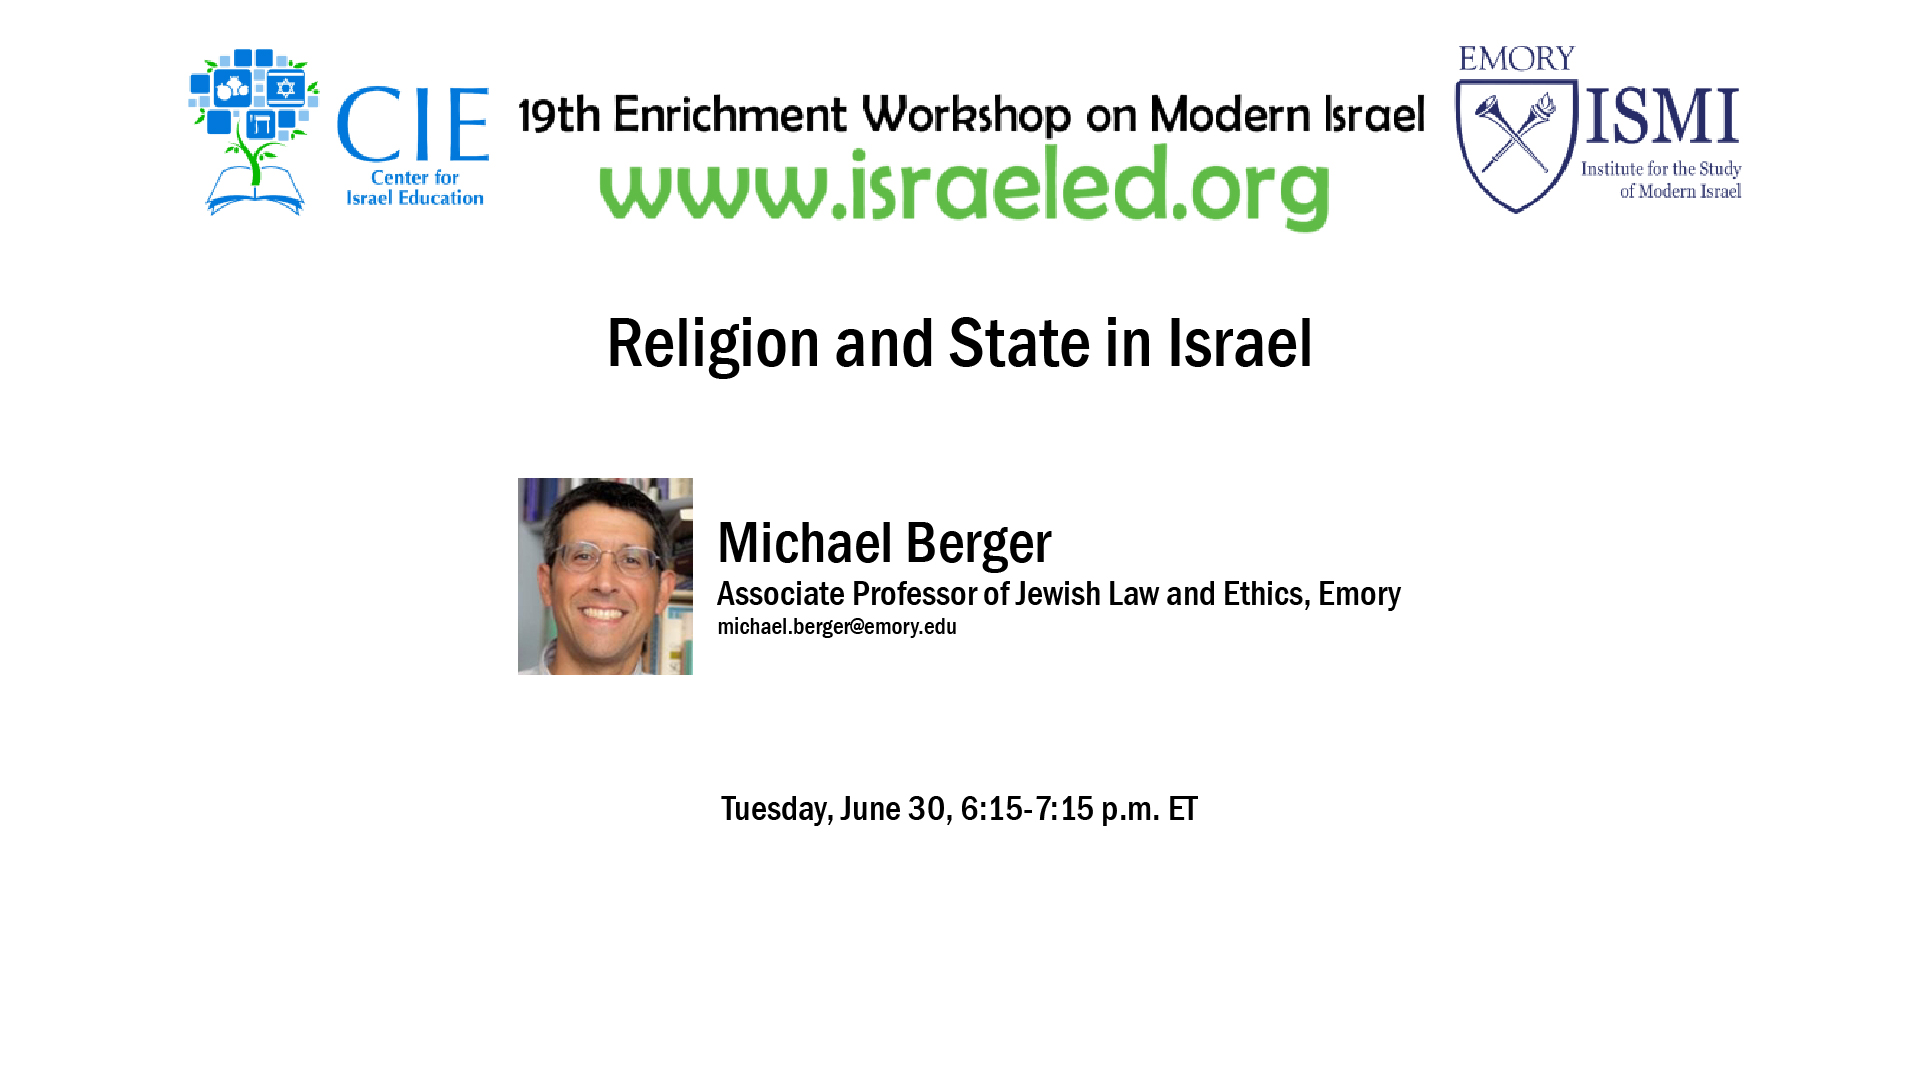 Religion and State in Israel, Professor Michael Berger (1:02)